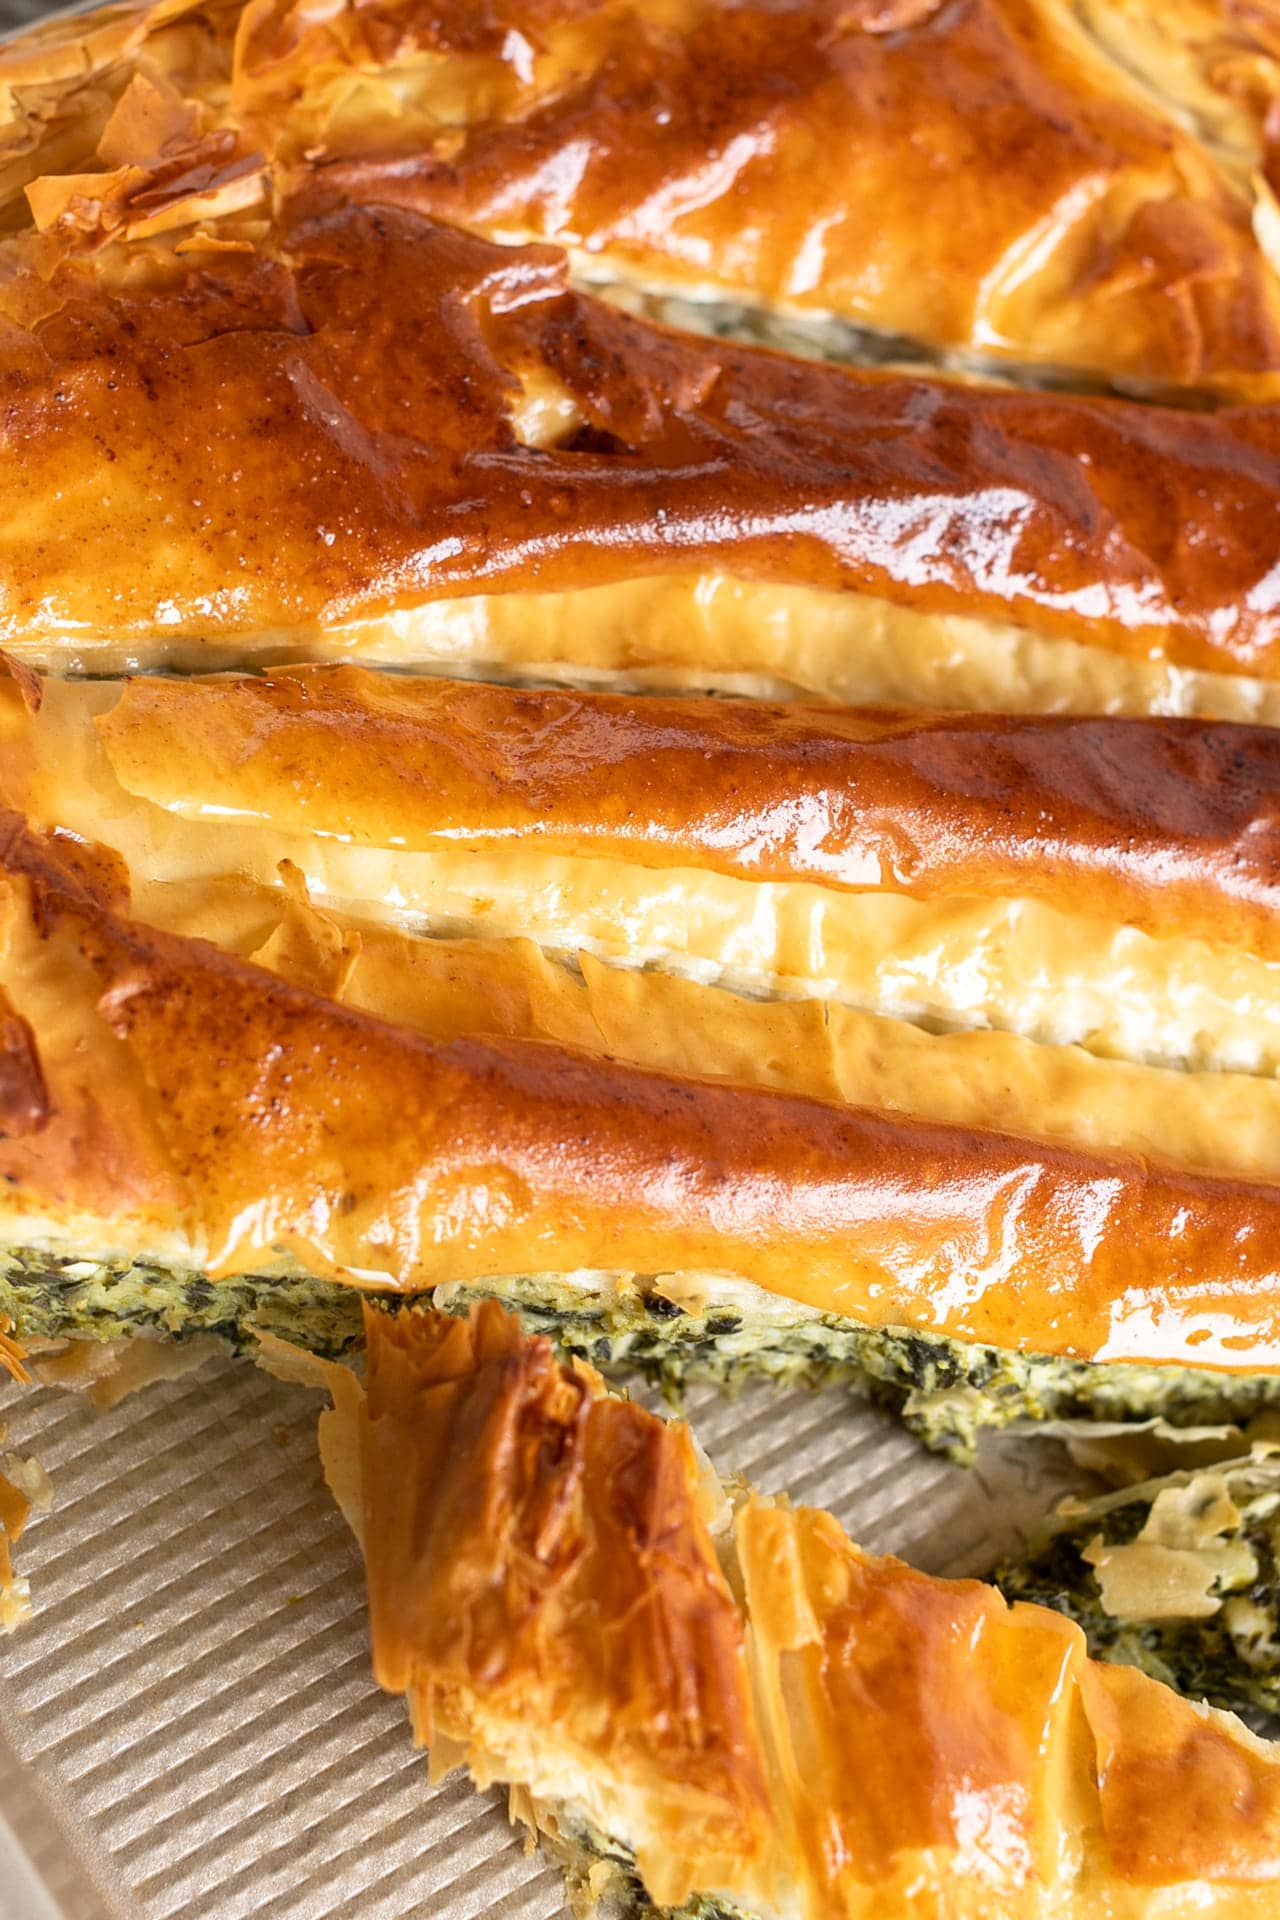 Spanakopita (Greek Spinach and Feta Pie) fresh out of the oven and sliced on an angle on a gold corrugated jelly roll baking sheet.